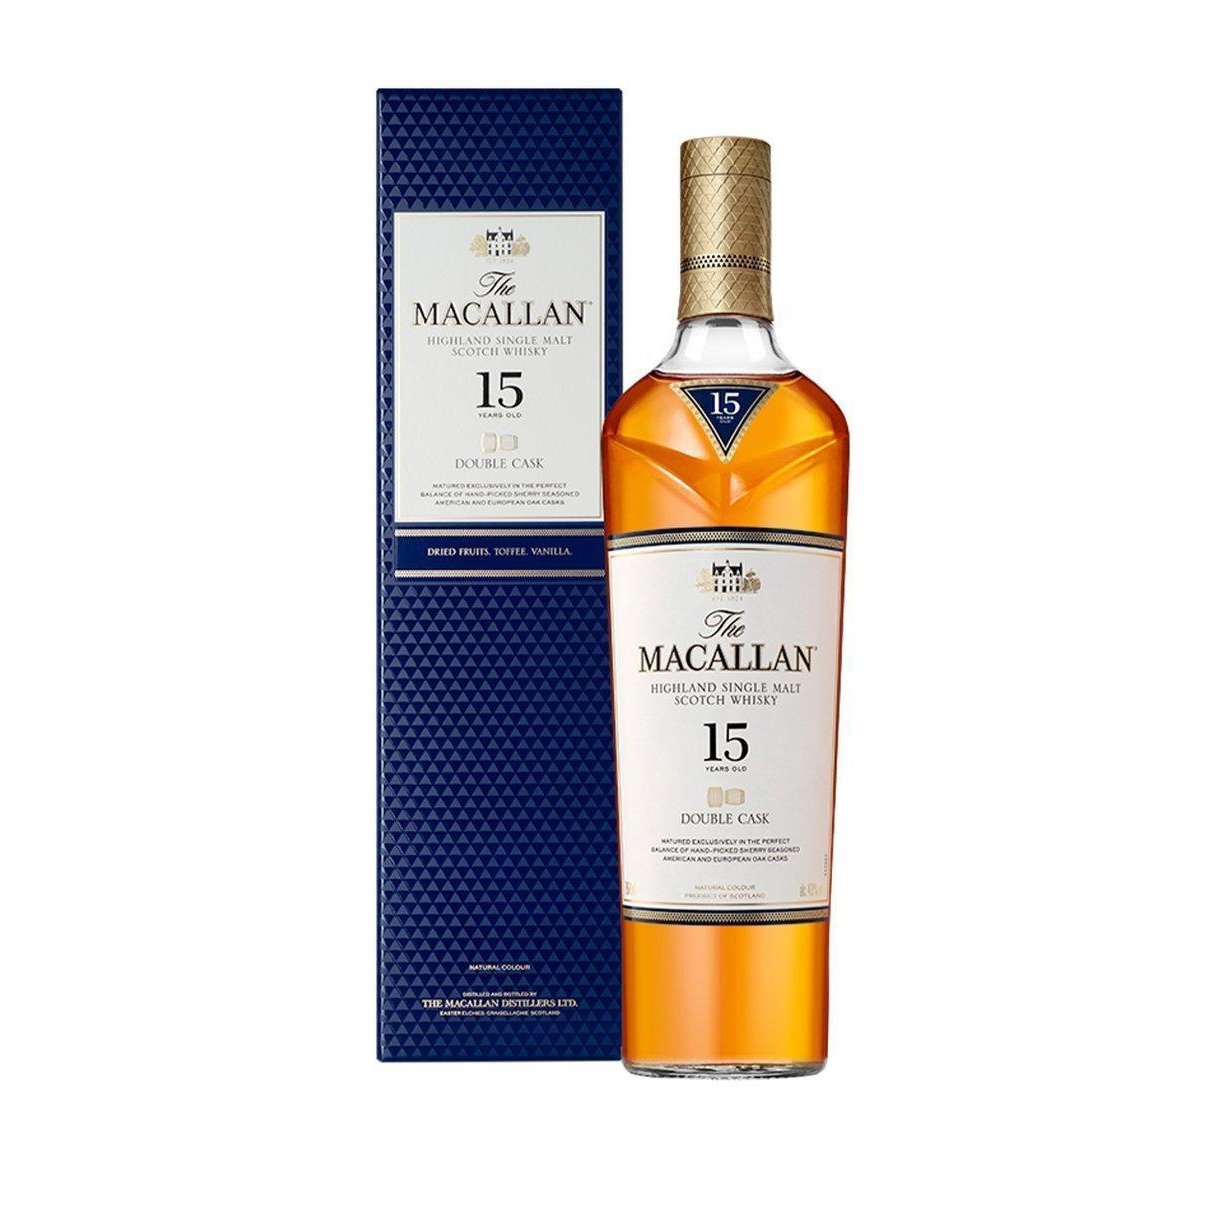 The Macallan - 'Double Cask' 15yr Highland Scotch Whisky (750ML) - The Epicurean Trader